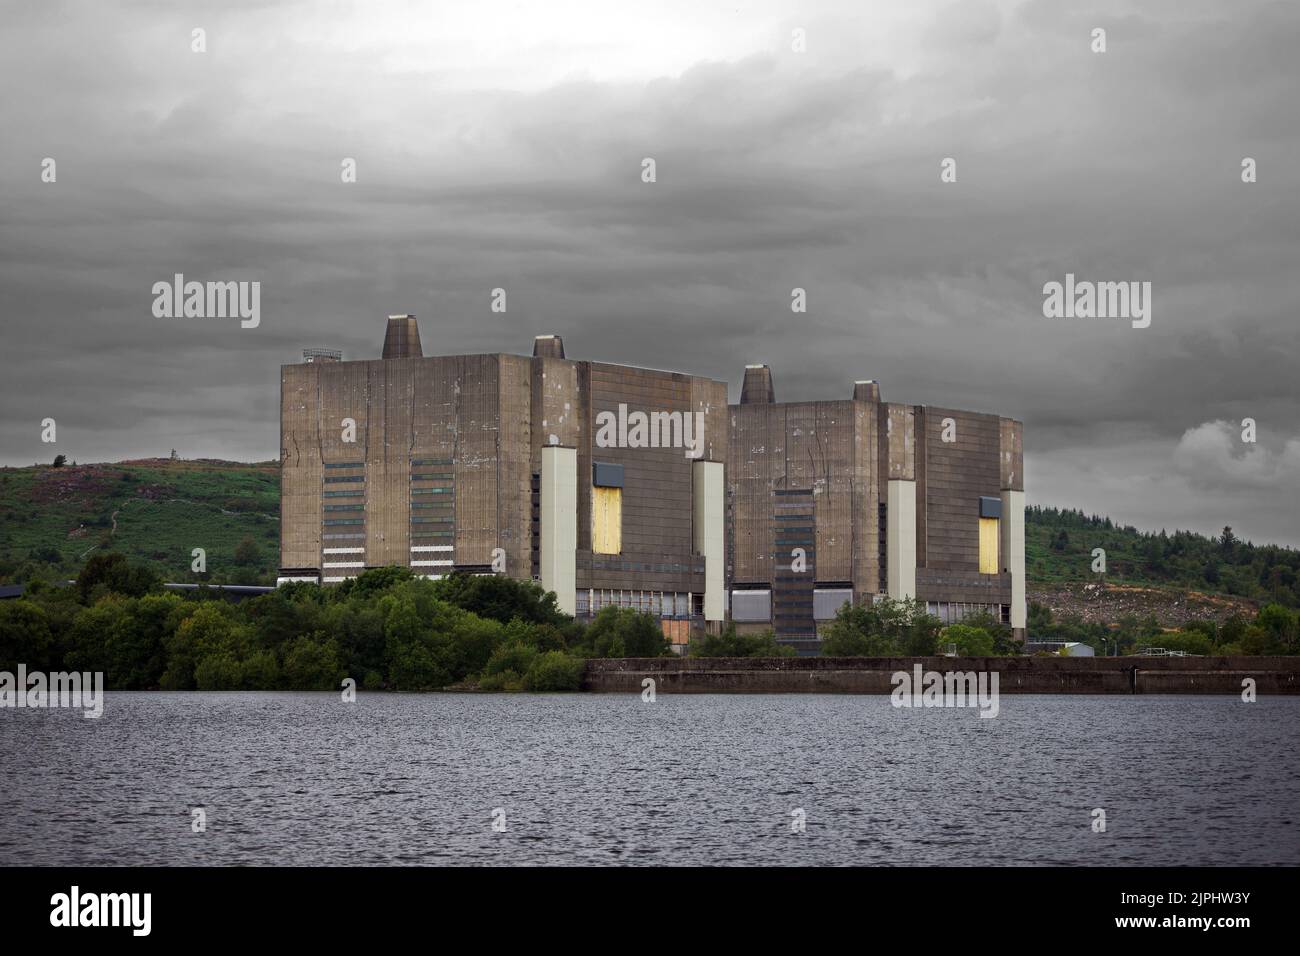 Trawsfynydd nuclear power station is a decommissioned Magnox nuclear power station situated in the Snowdonia National Park. It started working in 1965. Stock Photo